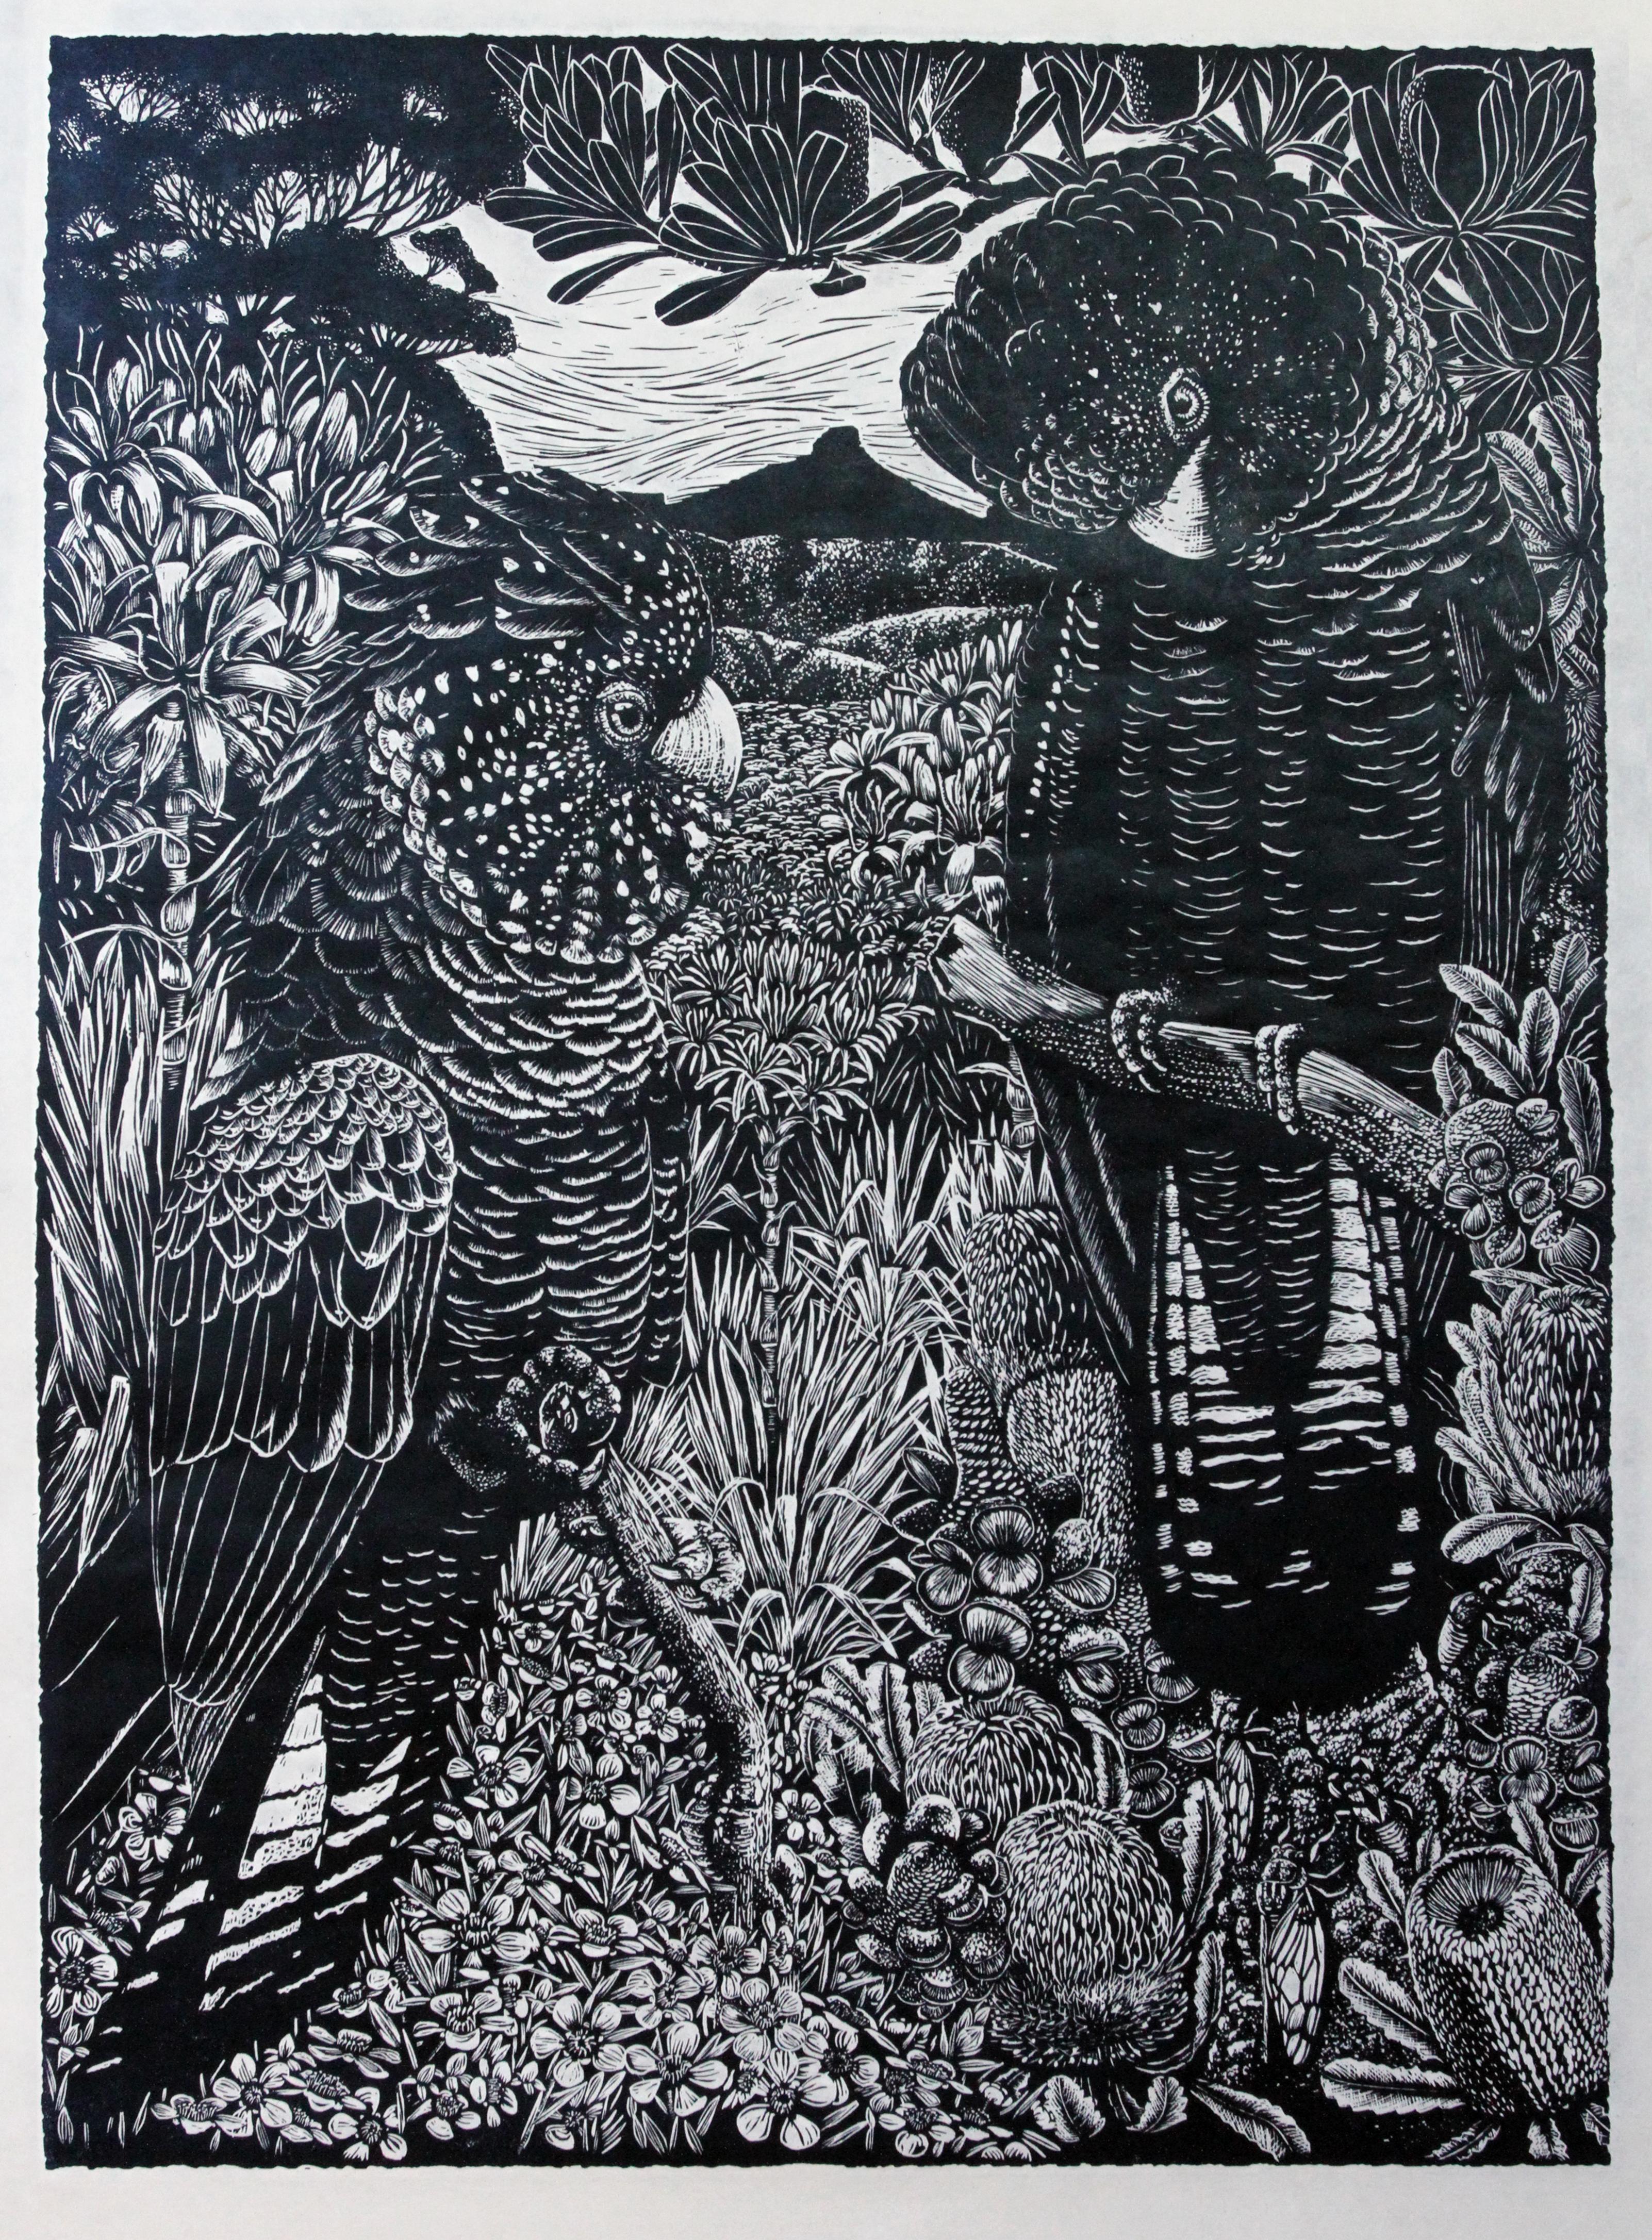 Peta West Animal Print - This is Yuin Country - Relief Linocut Print of Yellow Tailed Black Cockatoos